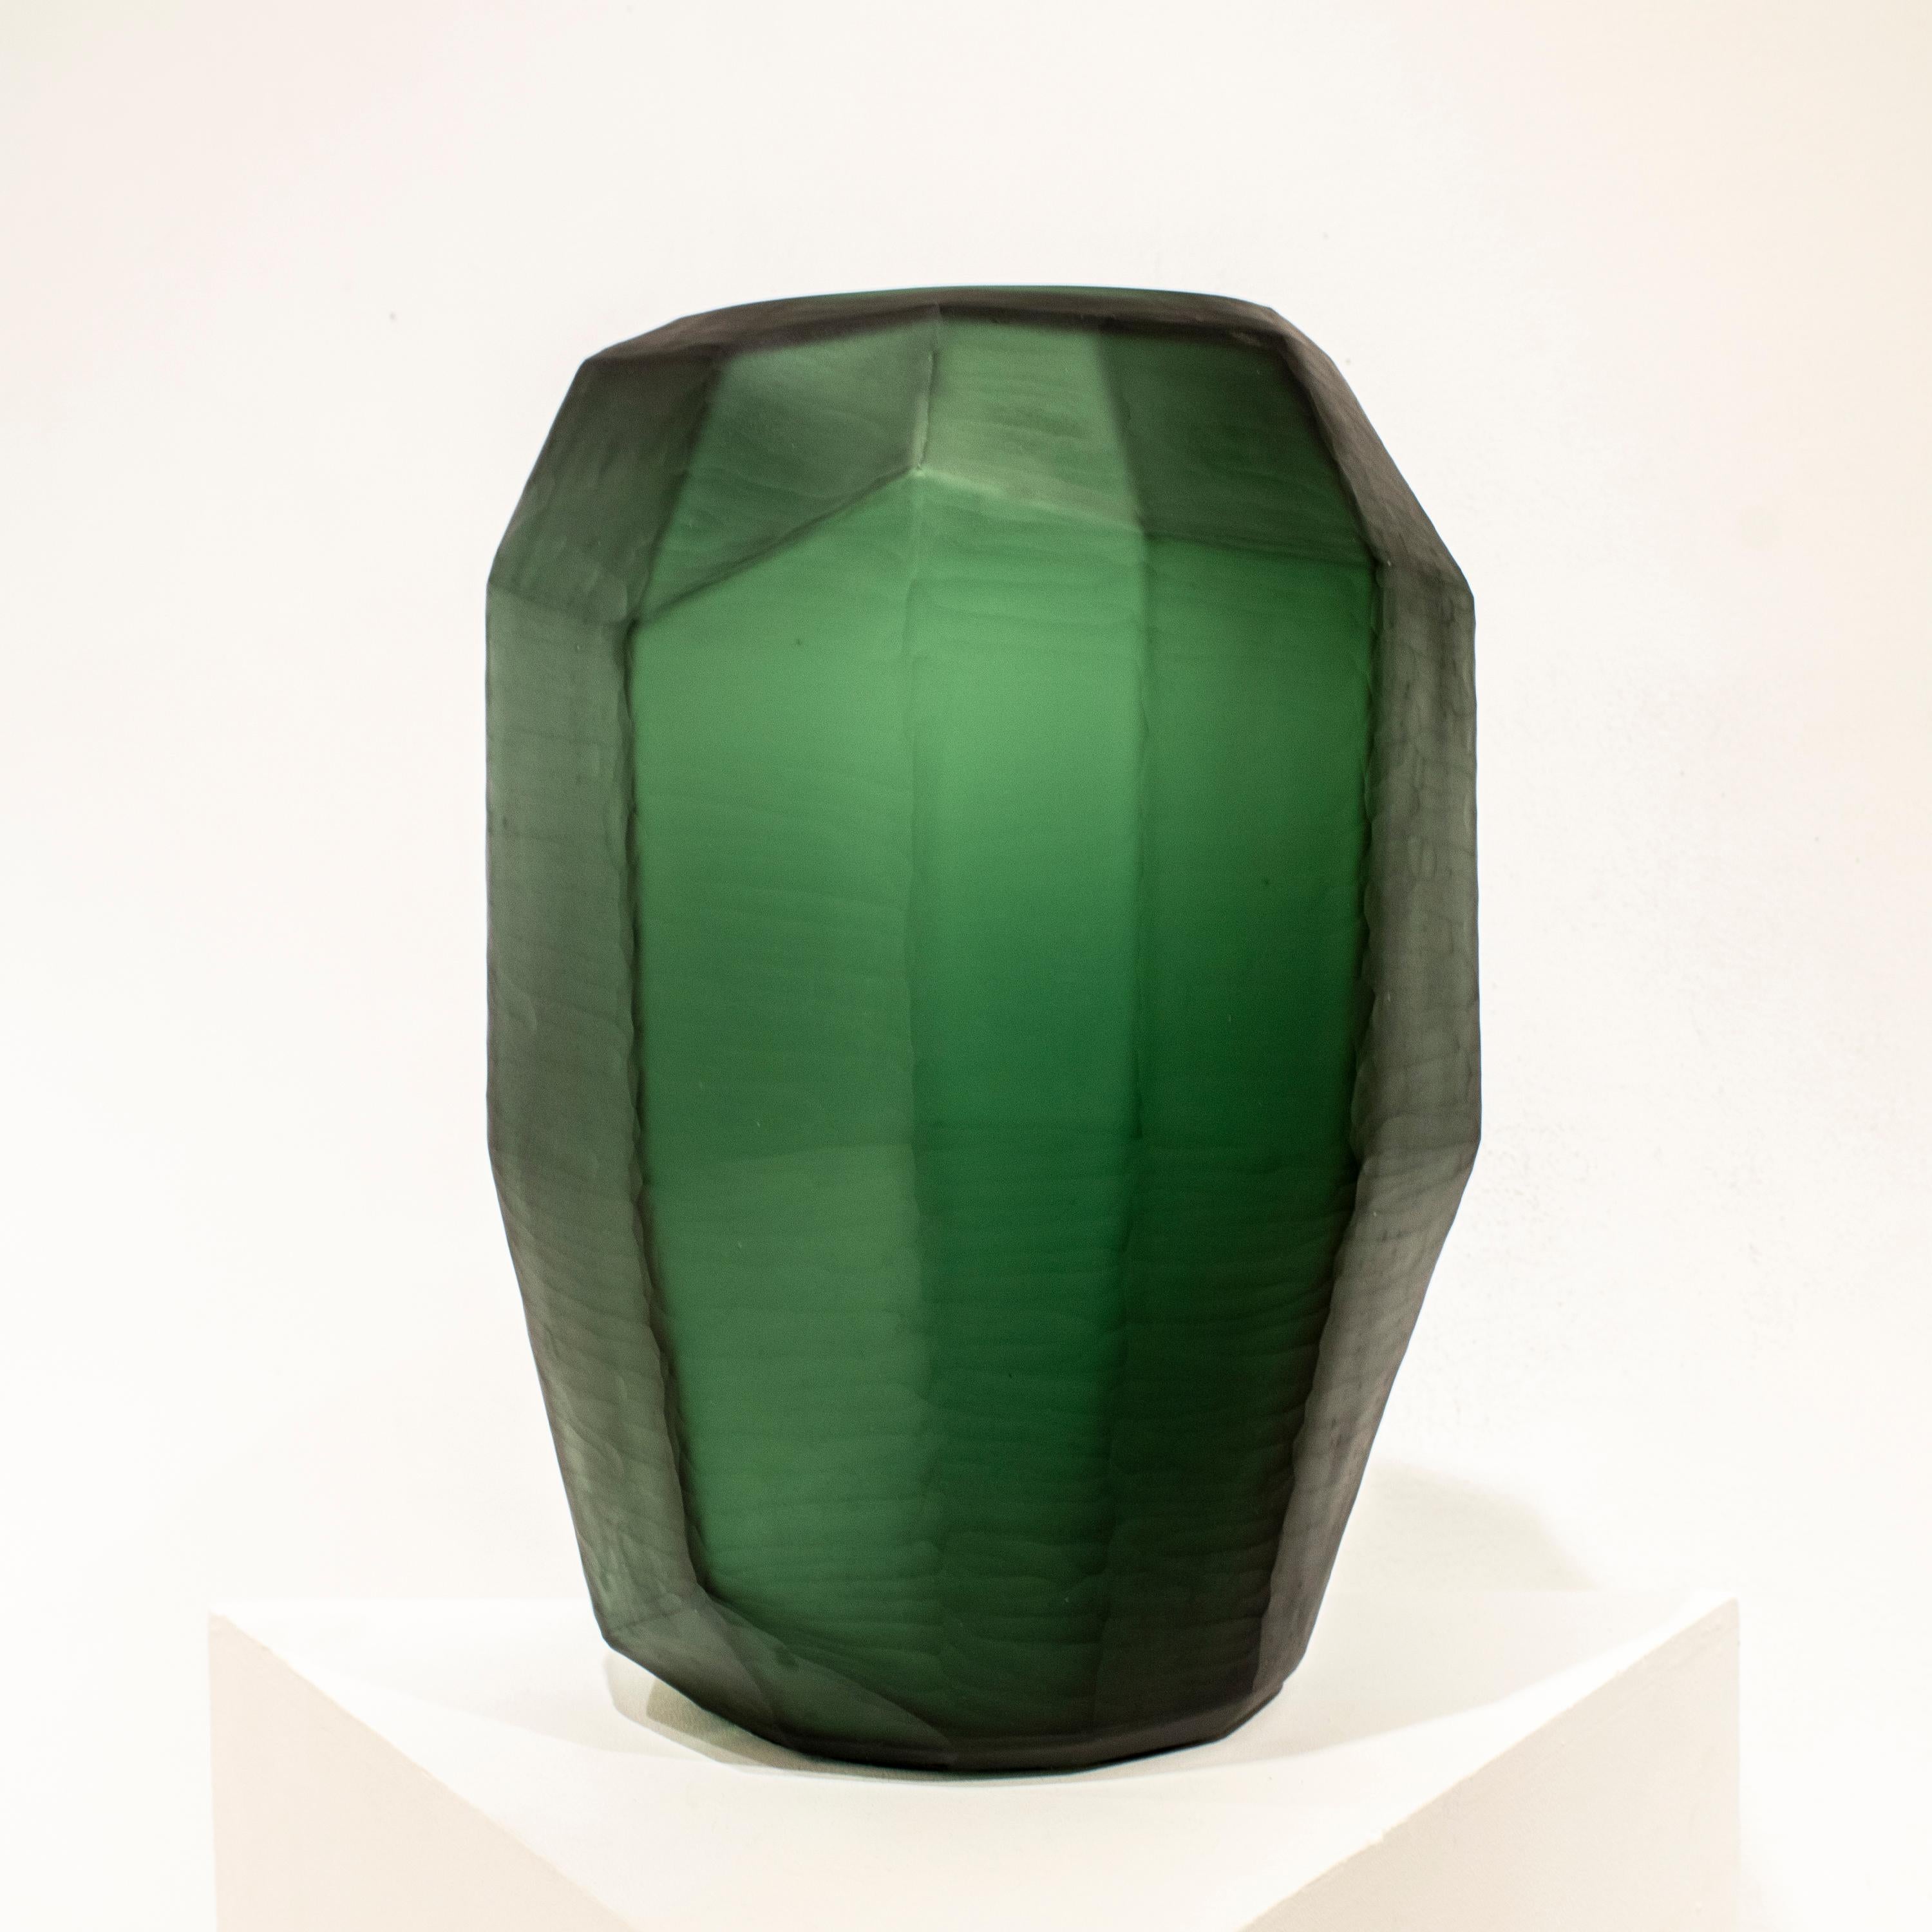 Italian green translucid glass vase, with faceted polygonal shape and a matted finish. 